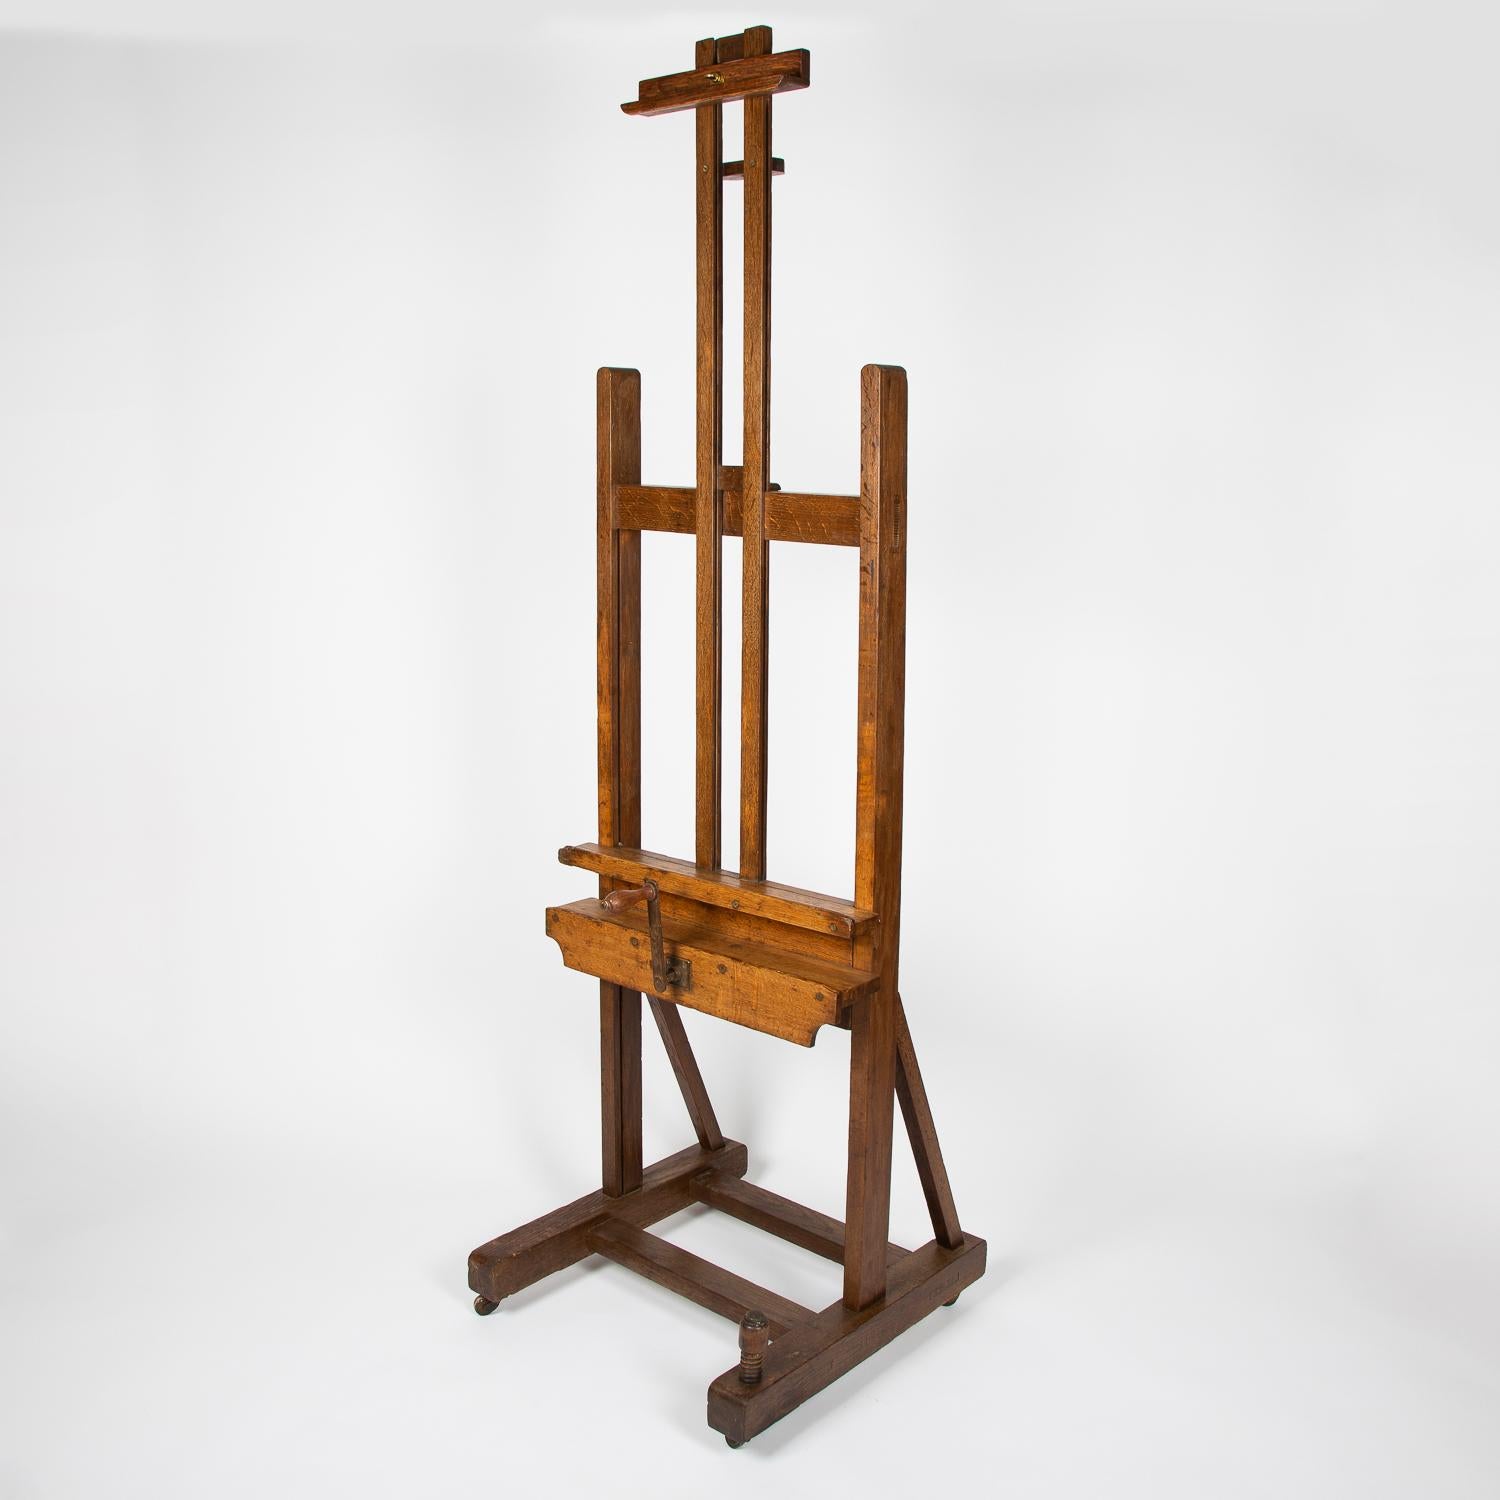 A late 19th century oak hand cranked rise and fall artist's H-frame easel.

With removable hand crank for adjusting the height.

Measures: Height: maximum: 102.5 inches. (260 cm). - minimum: 63 inches. (160 cm).